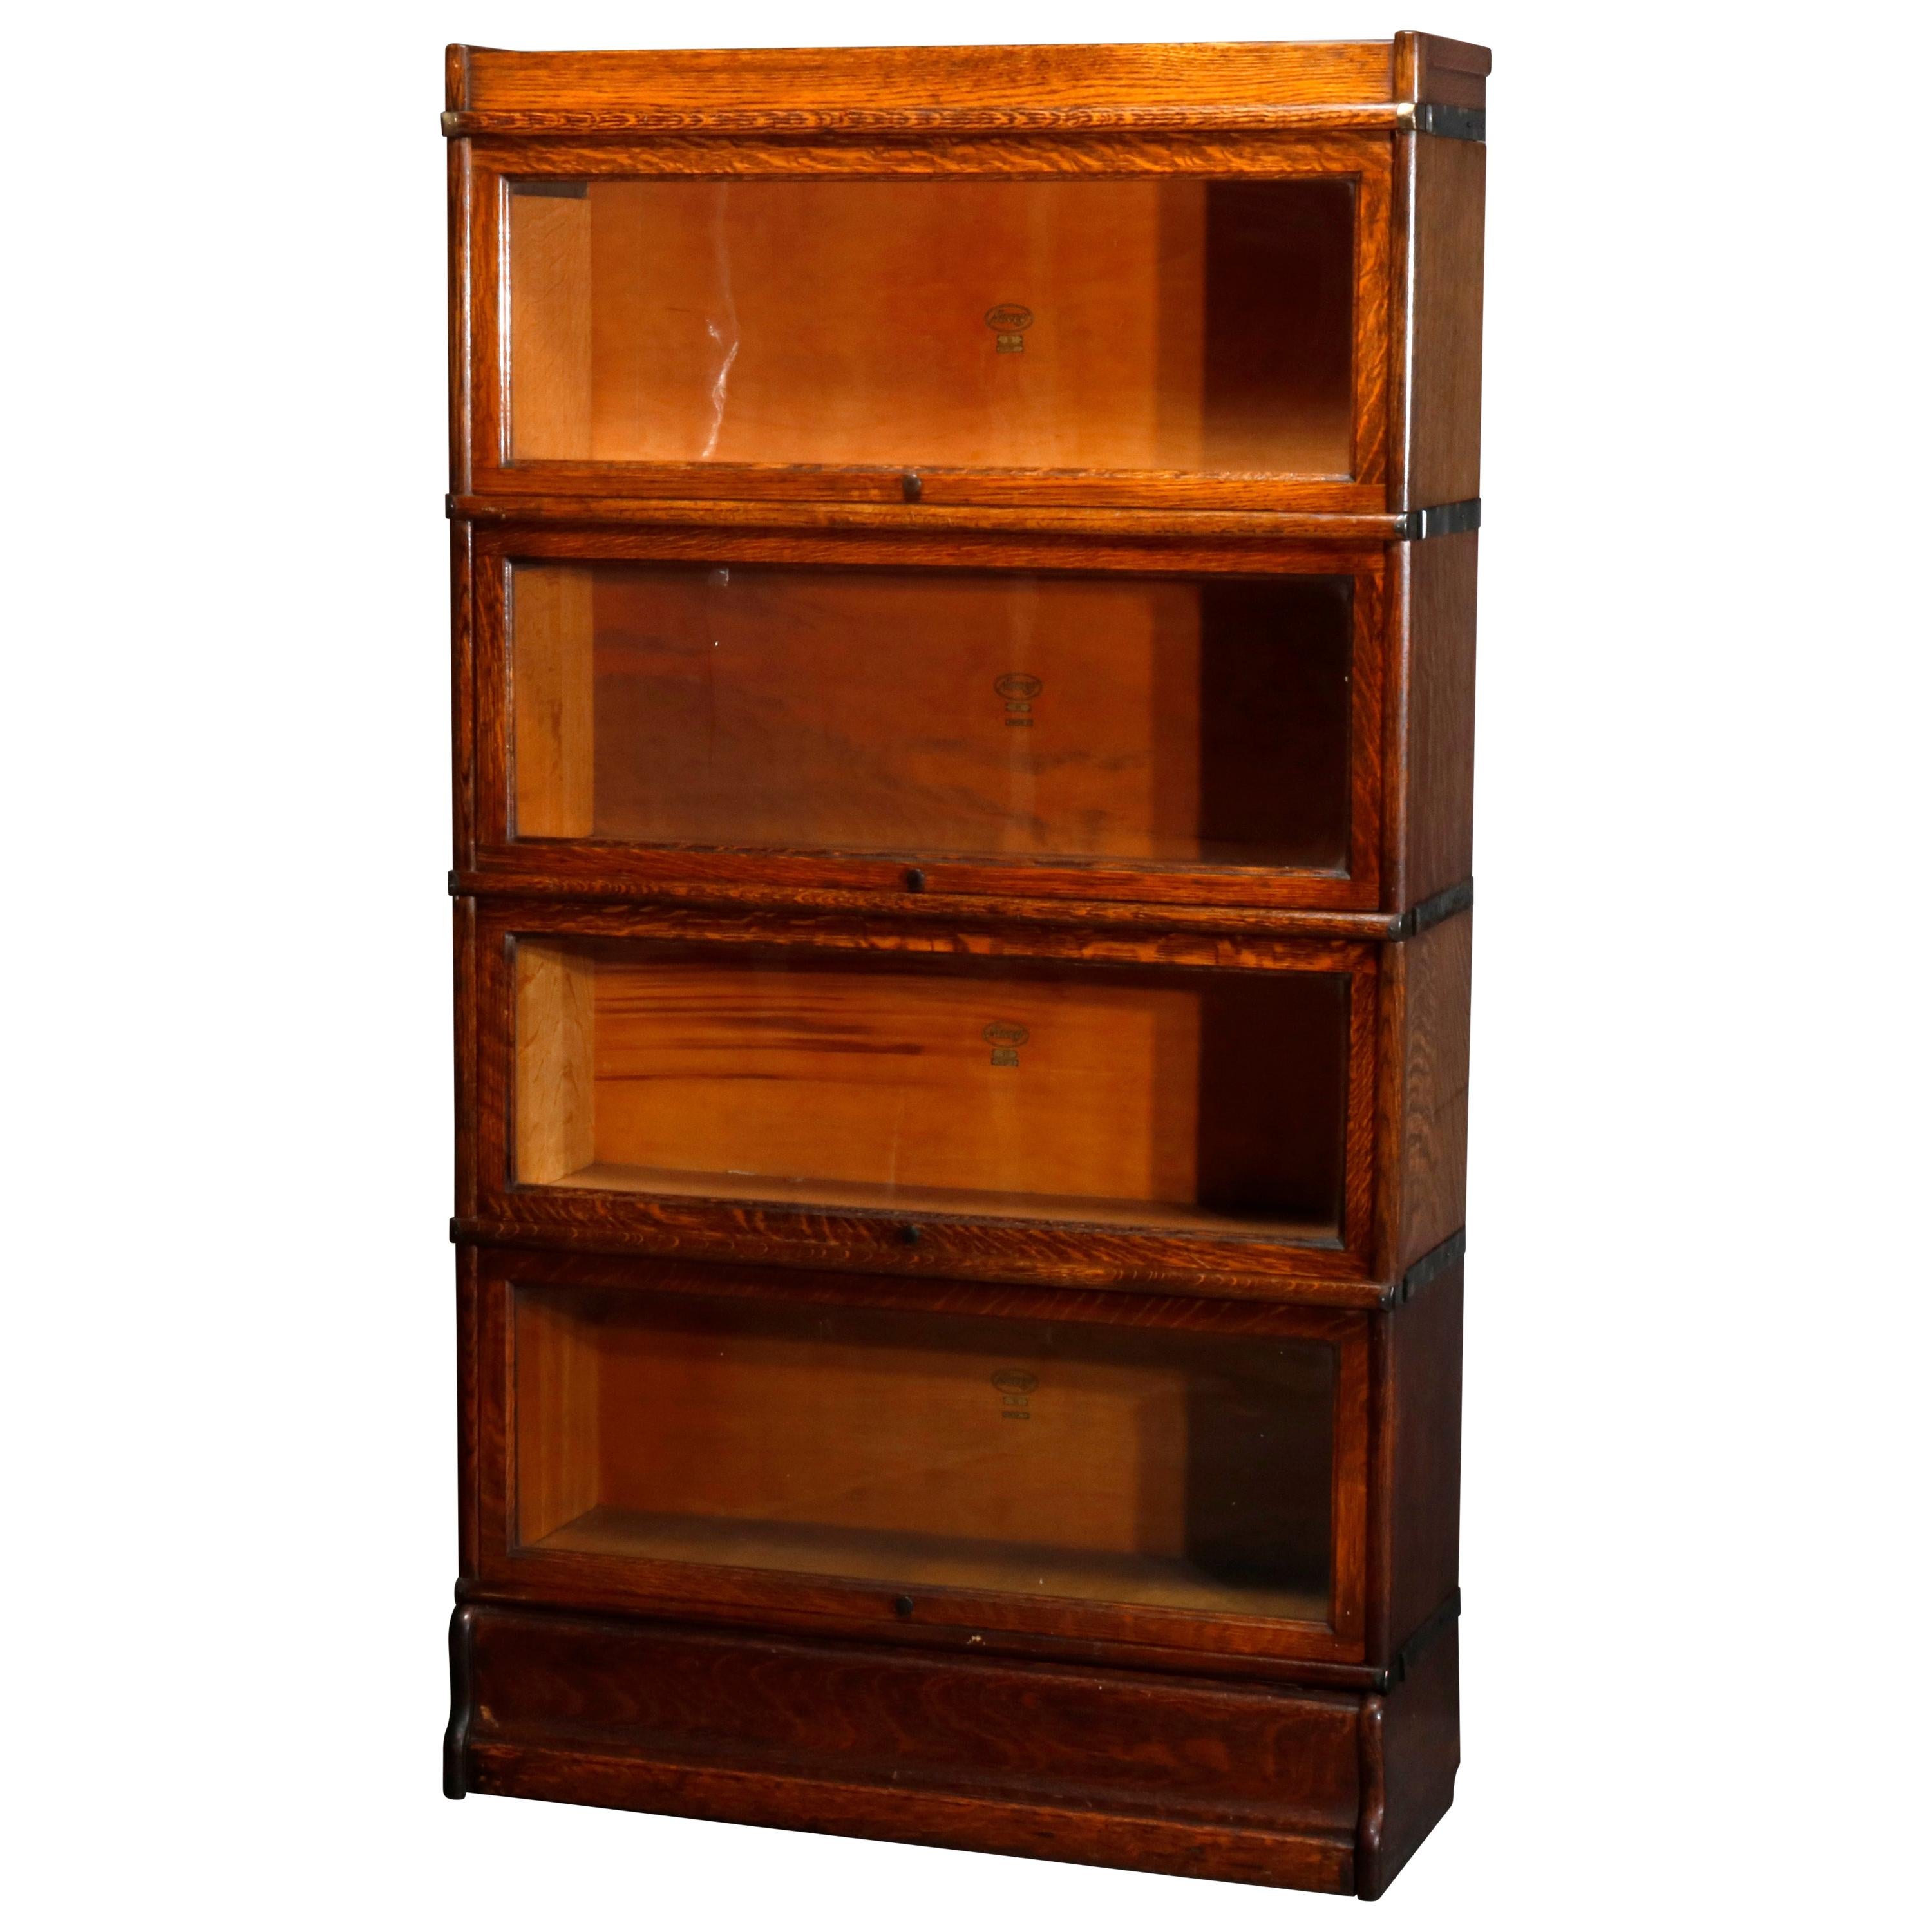 Antique Arts & Crafts Style Oak 4 Stack Barrister Bookcase by Macey, circa 1910